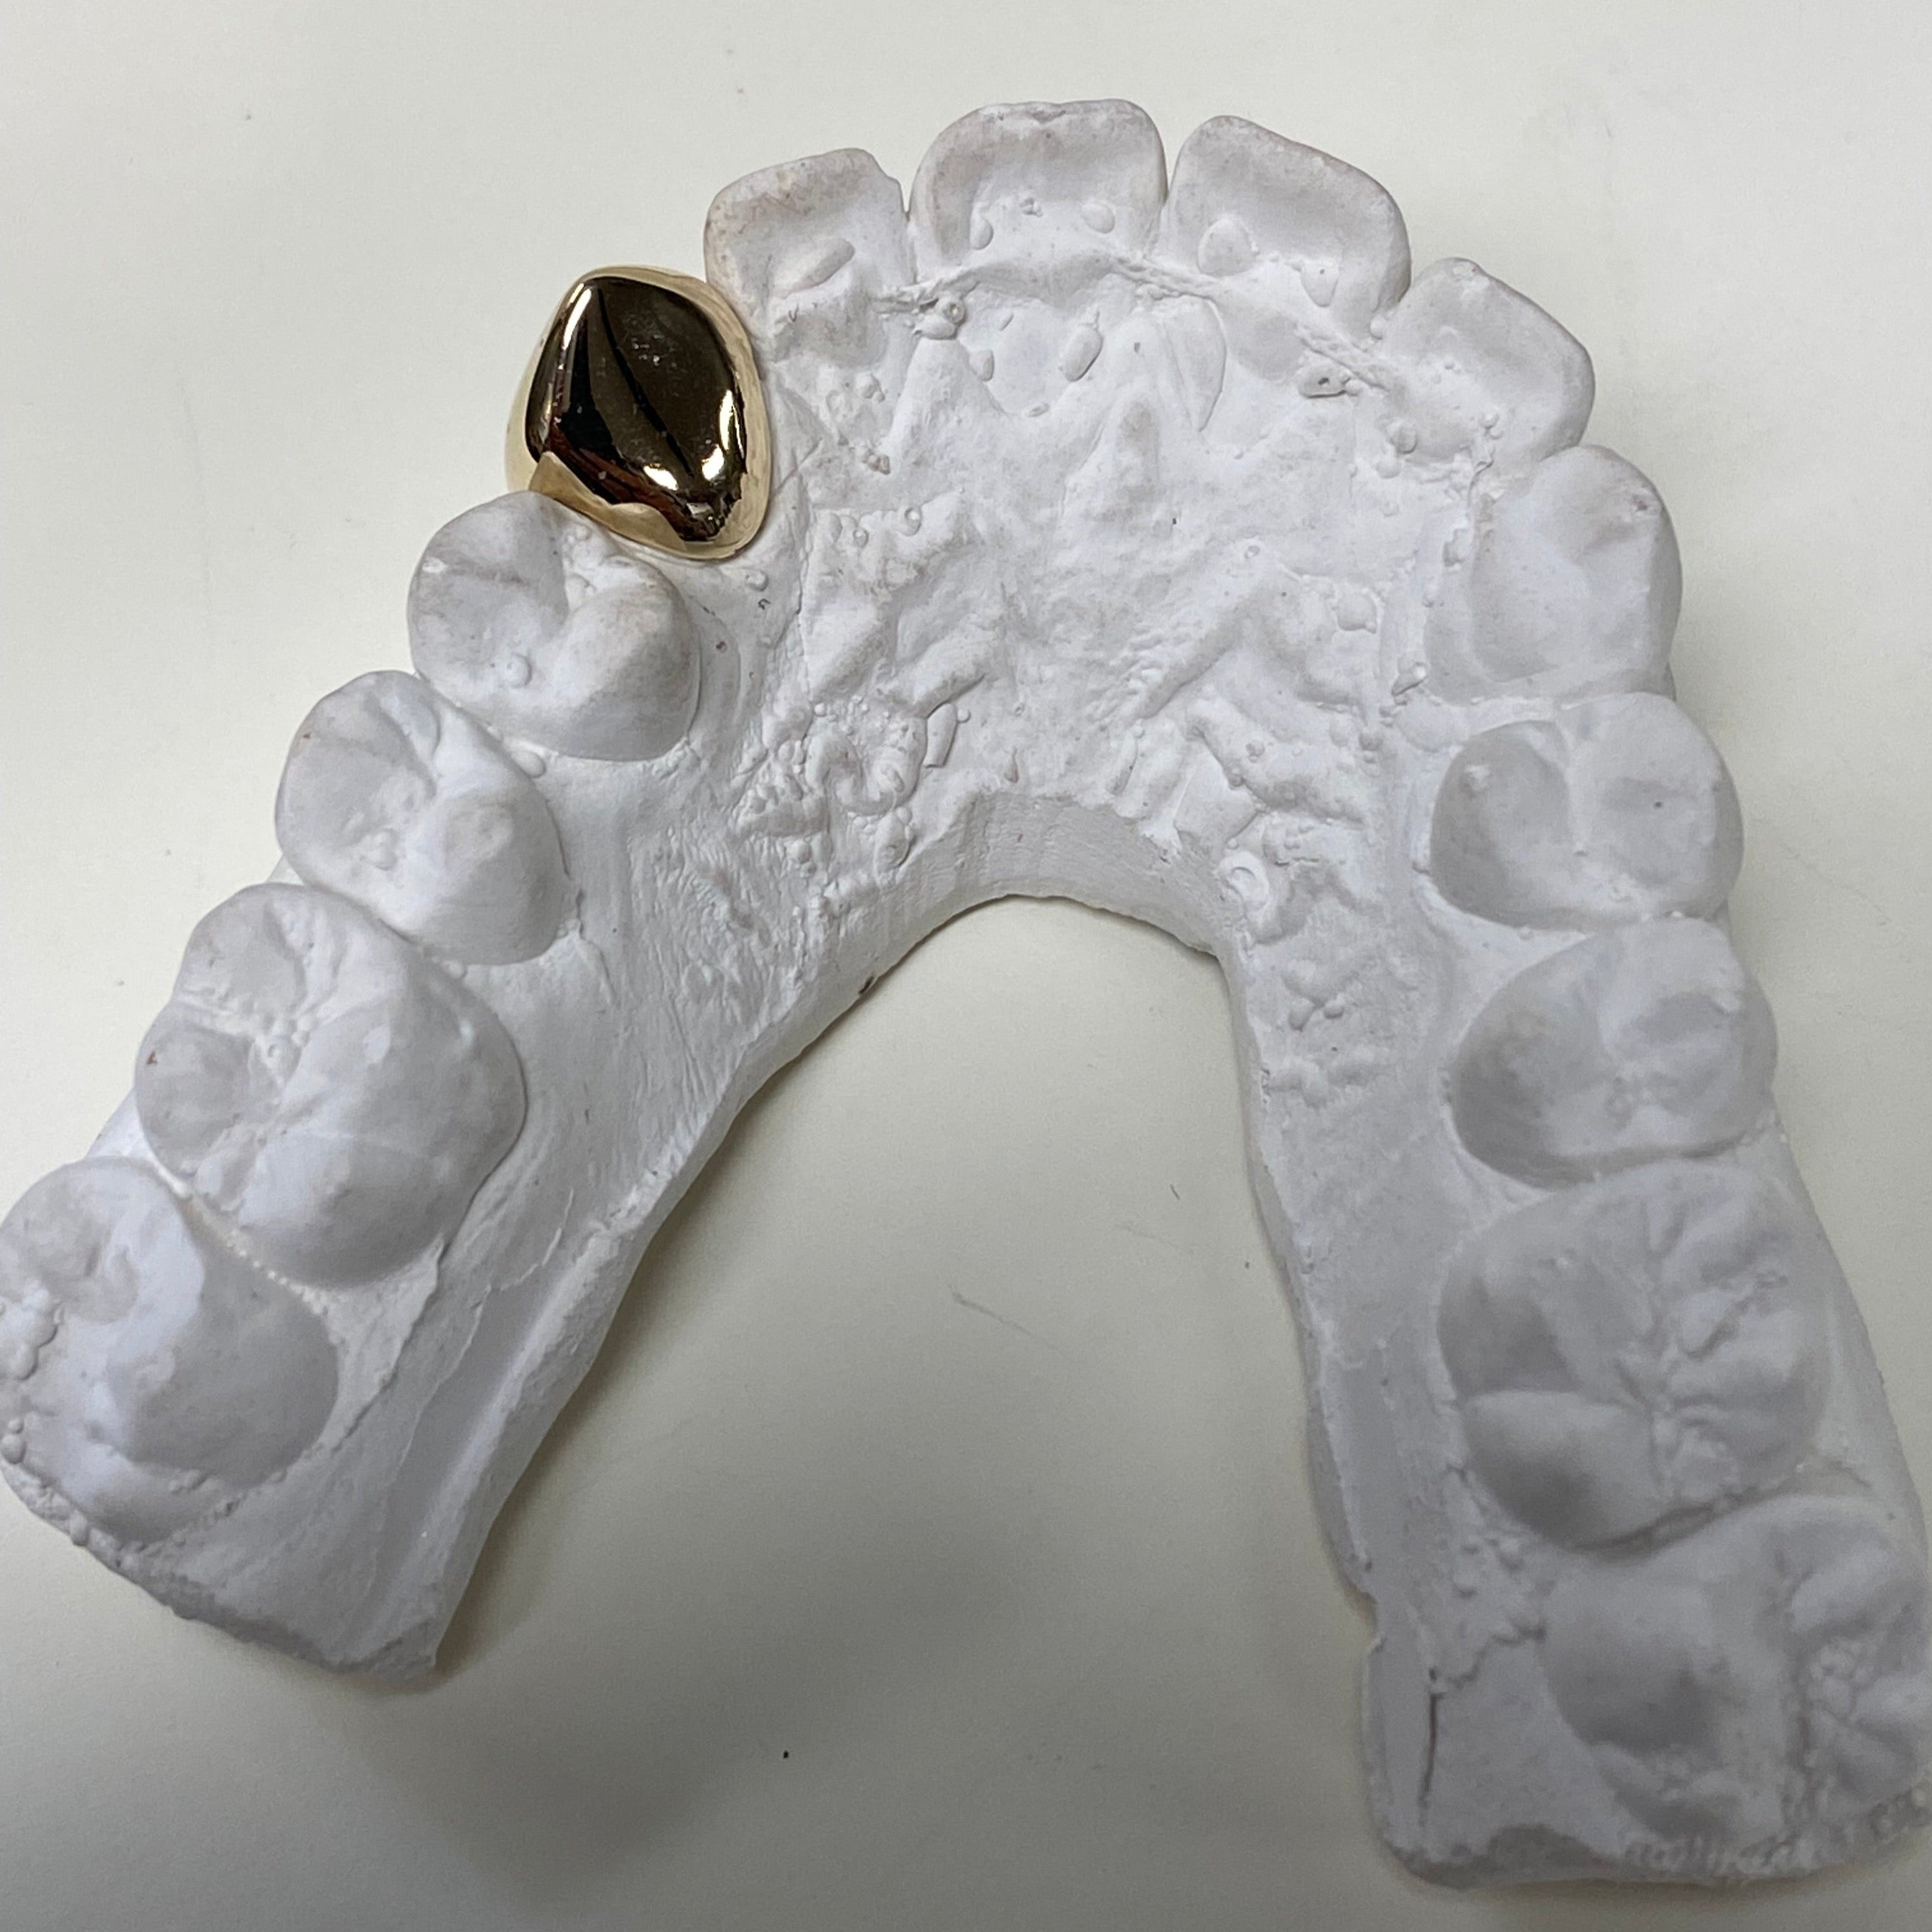 Custom Made Grillz-Single tooth capped in solid 9kt Gold